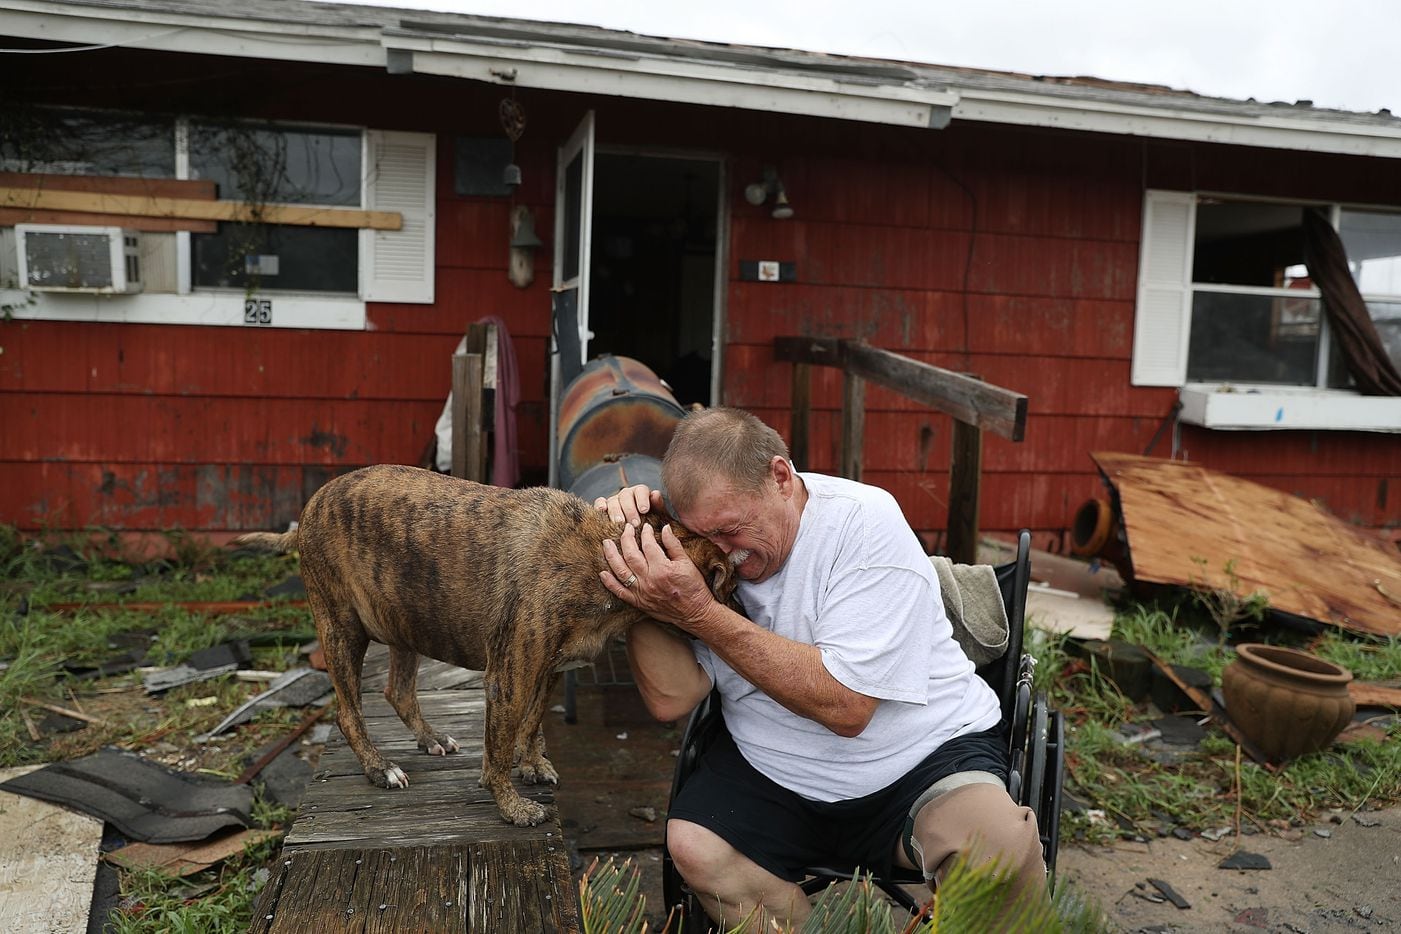 Steve Culver cries with his dog Otis as he talks about what he said was the, "most terrifying event in his life," when Hurricane Harvey blew in and destroyed most of his home while he and his wife took shelter there on Saturday in Rockport.